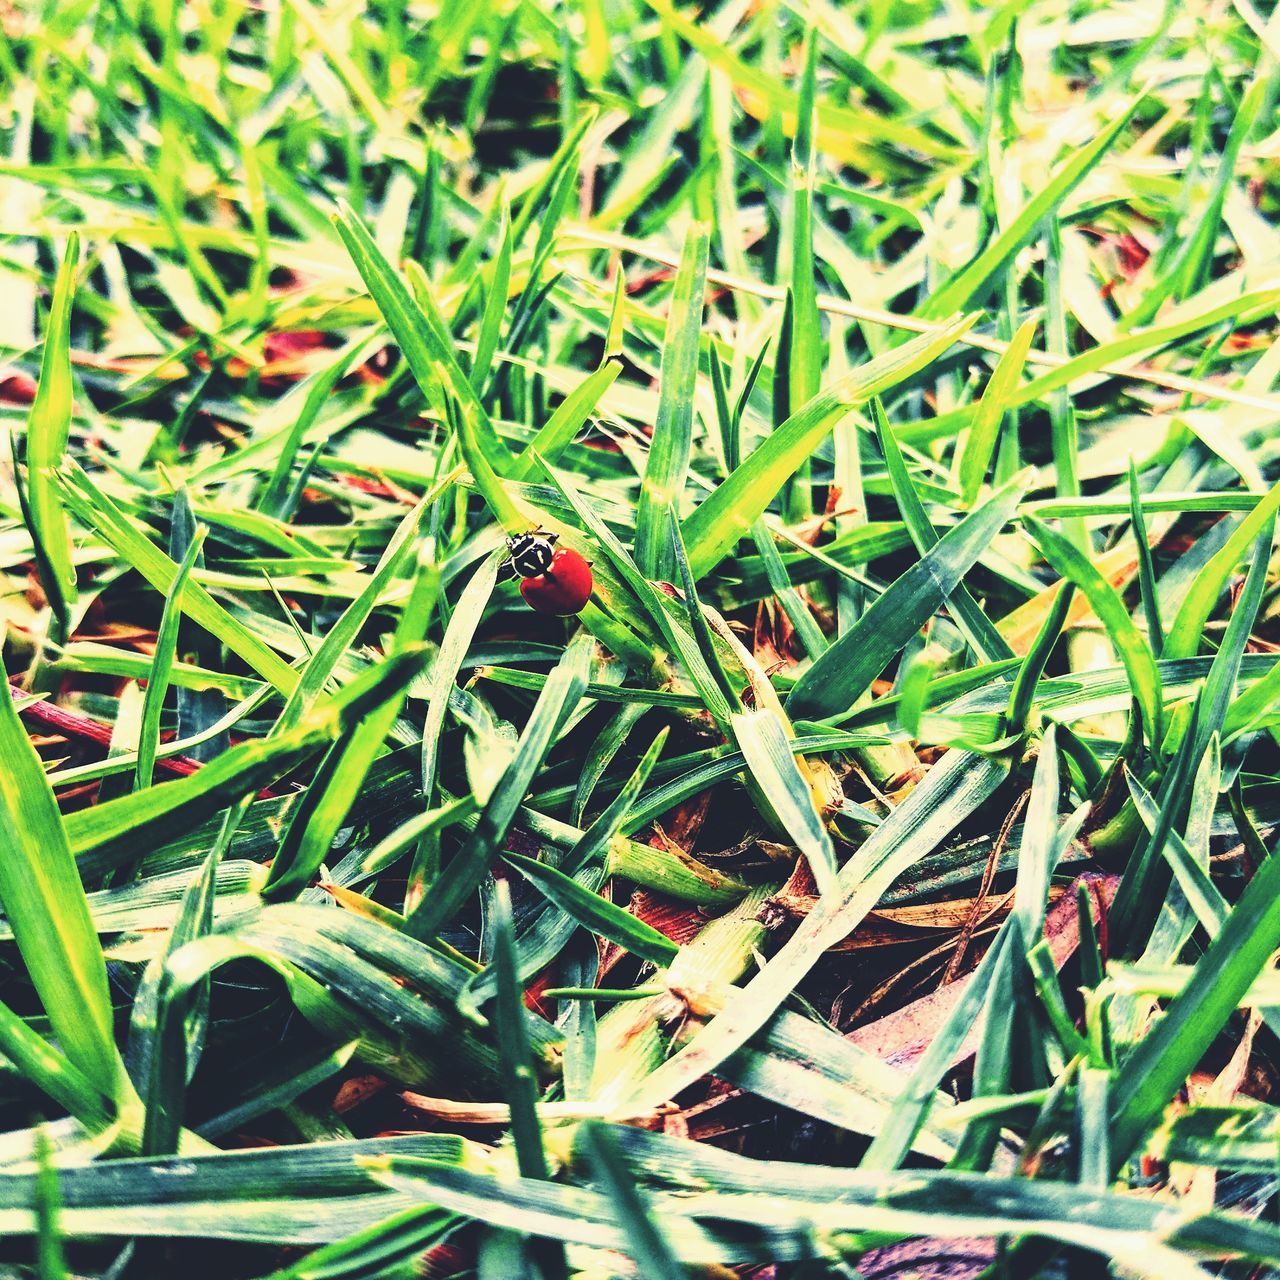 green color, grass, animals in the wild, insect, nature, outdoors, one animal, animal themes, day, close-up, no people, plant, growth, tiny